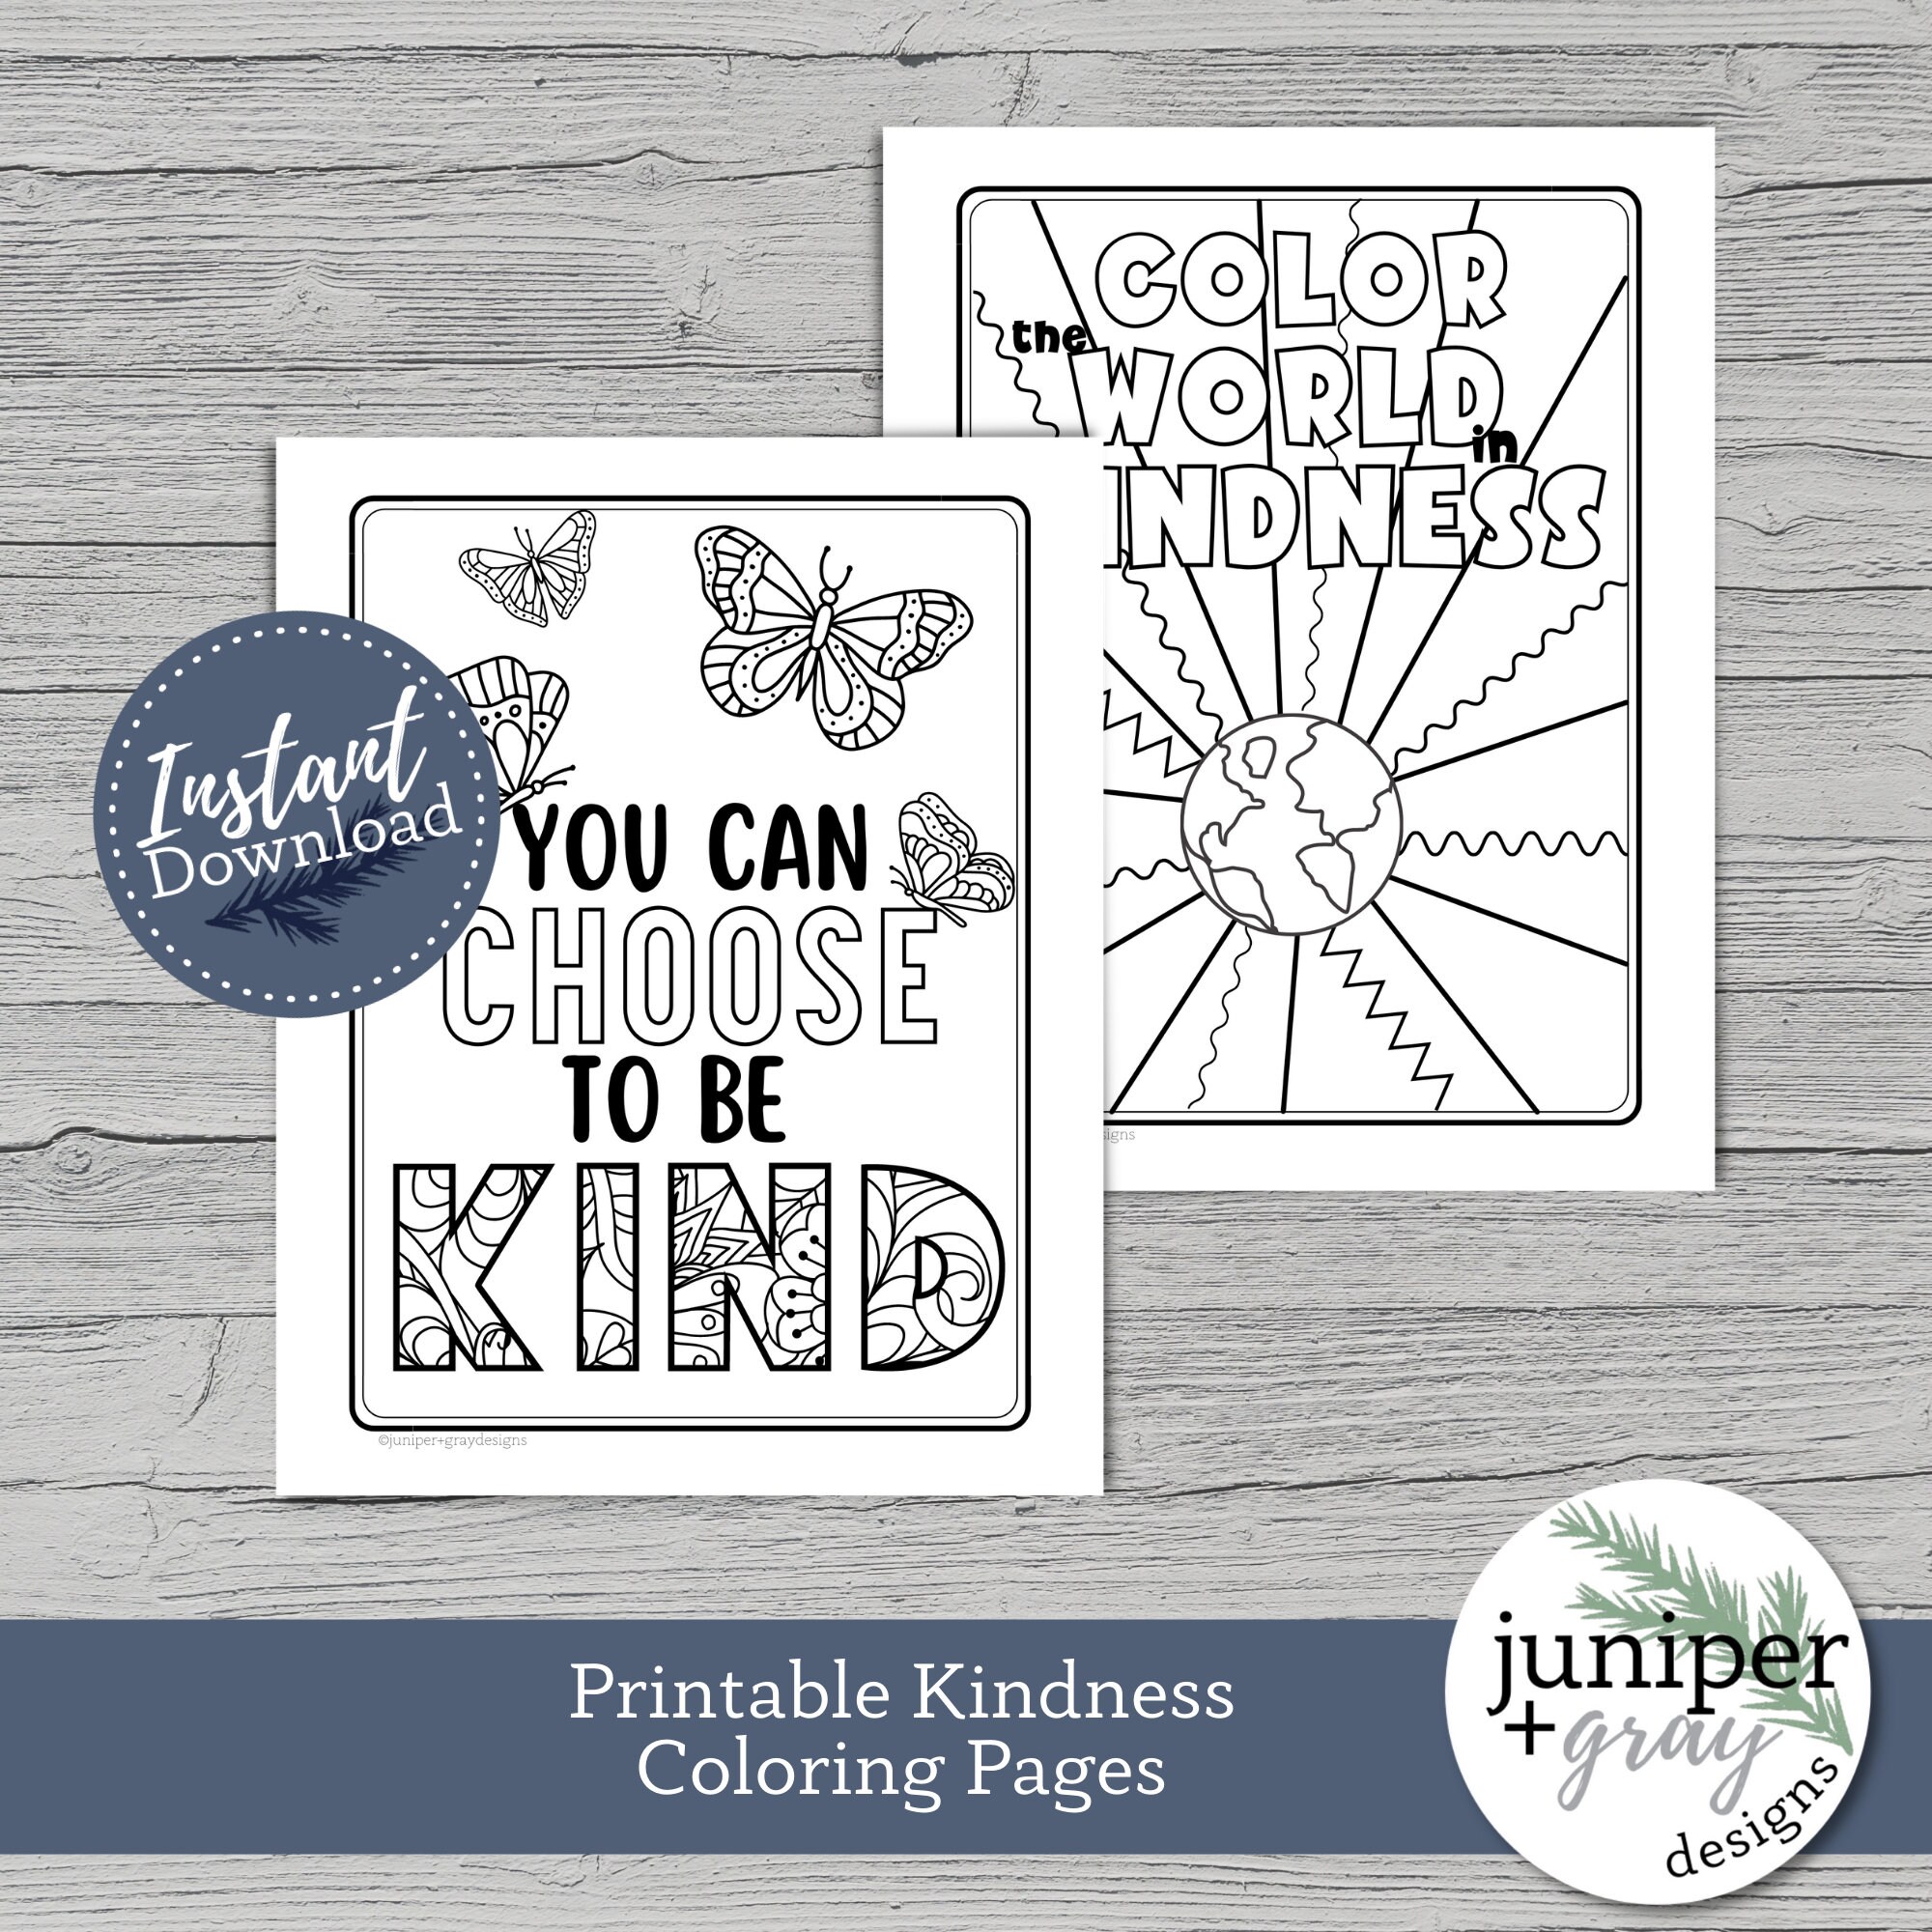 Printable kindness coloring pages for all ages ii choose to be kind coloring page kindness printable instant download pdf